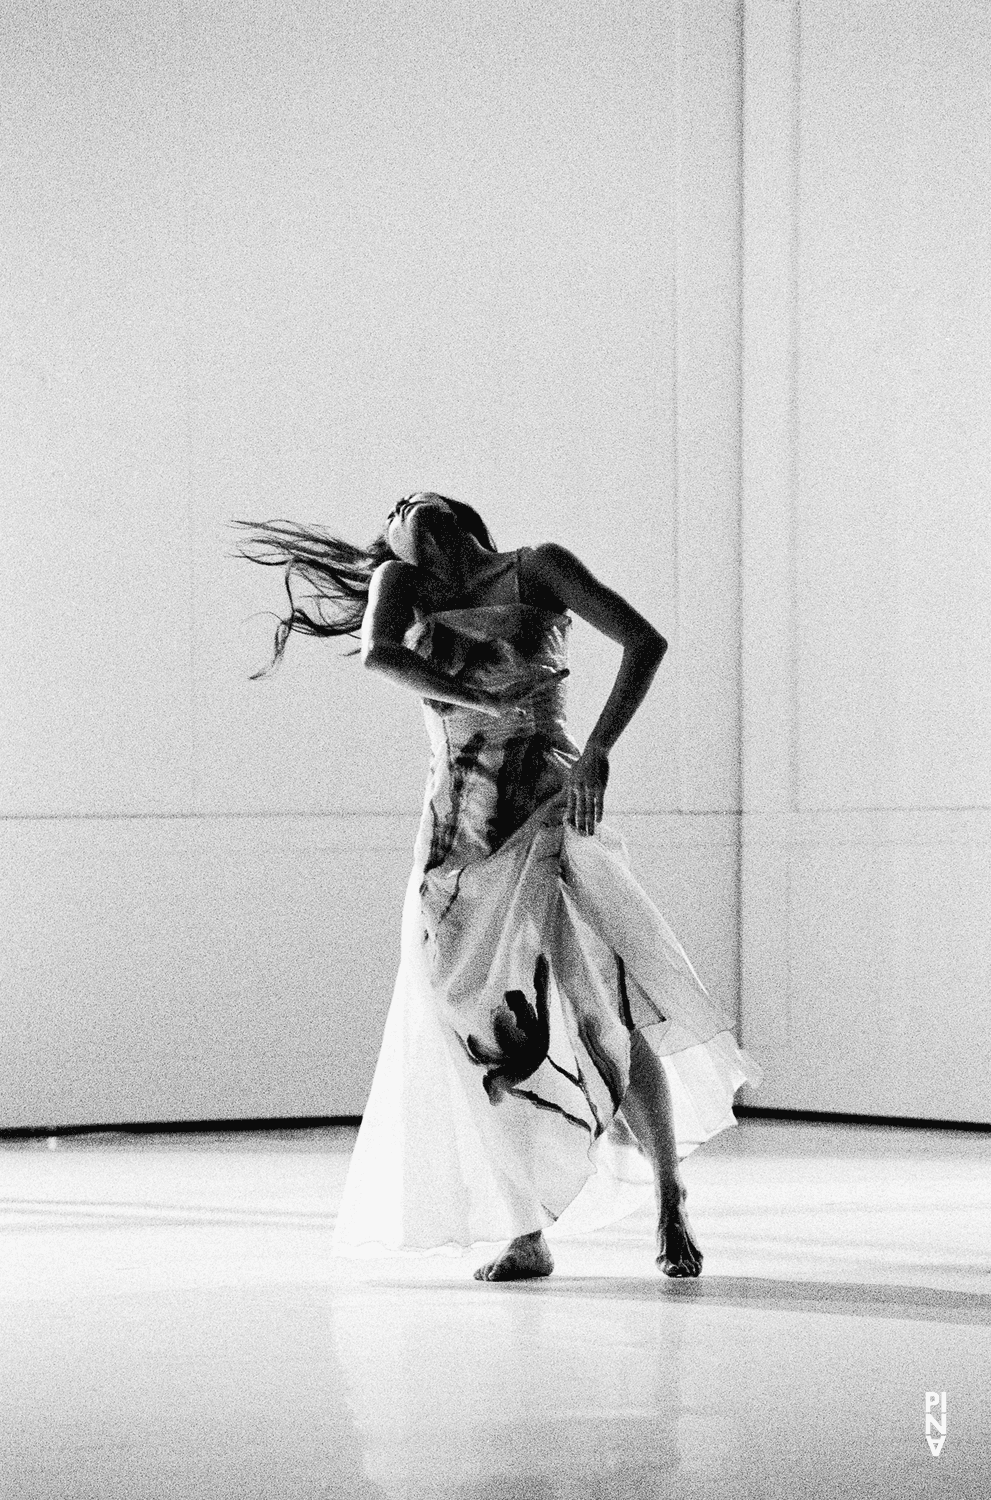 Azusa Seyama in “For the Children of Yesterday, Today and Tomorrow” by Pina Bausch